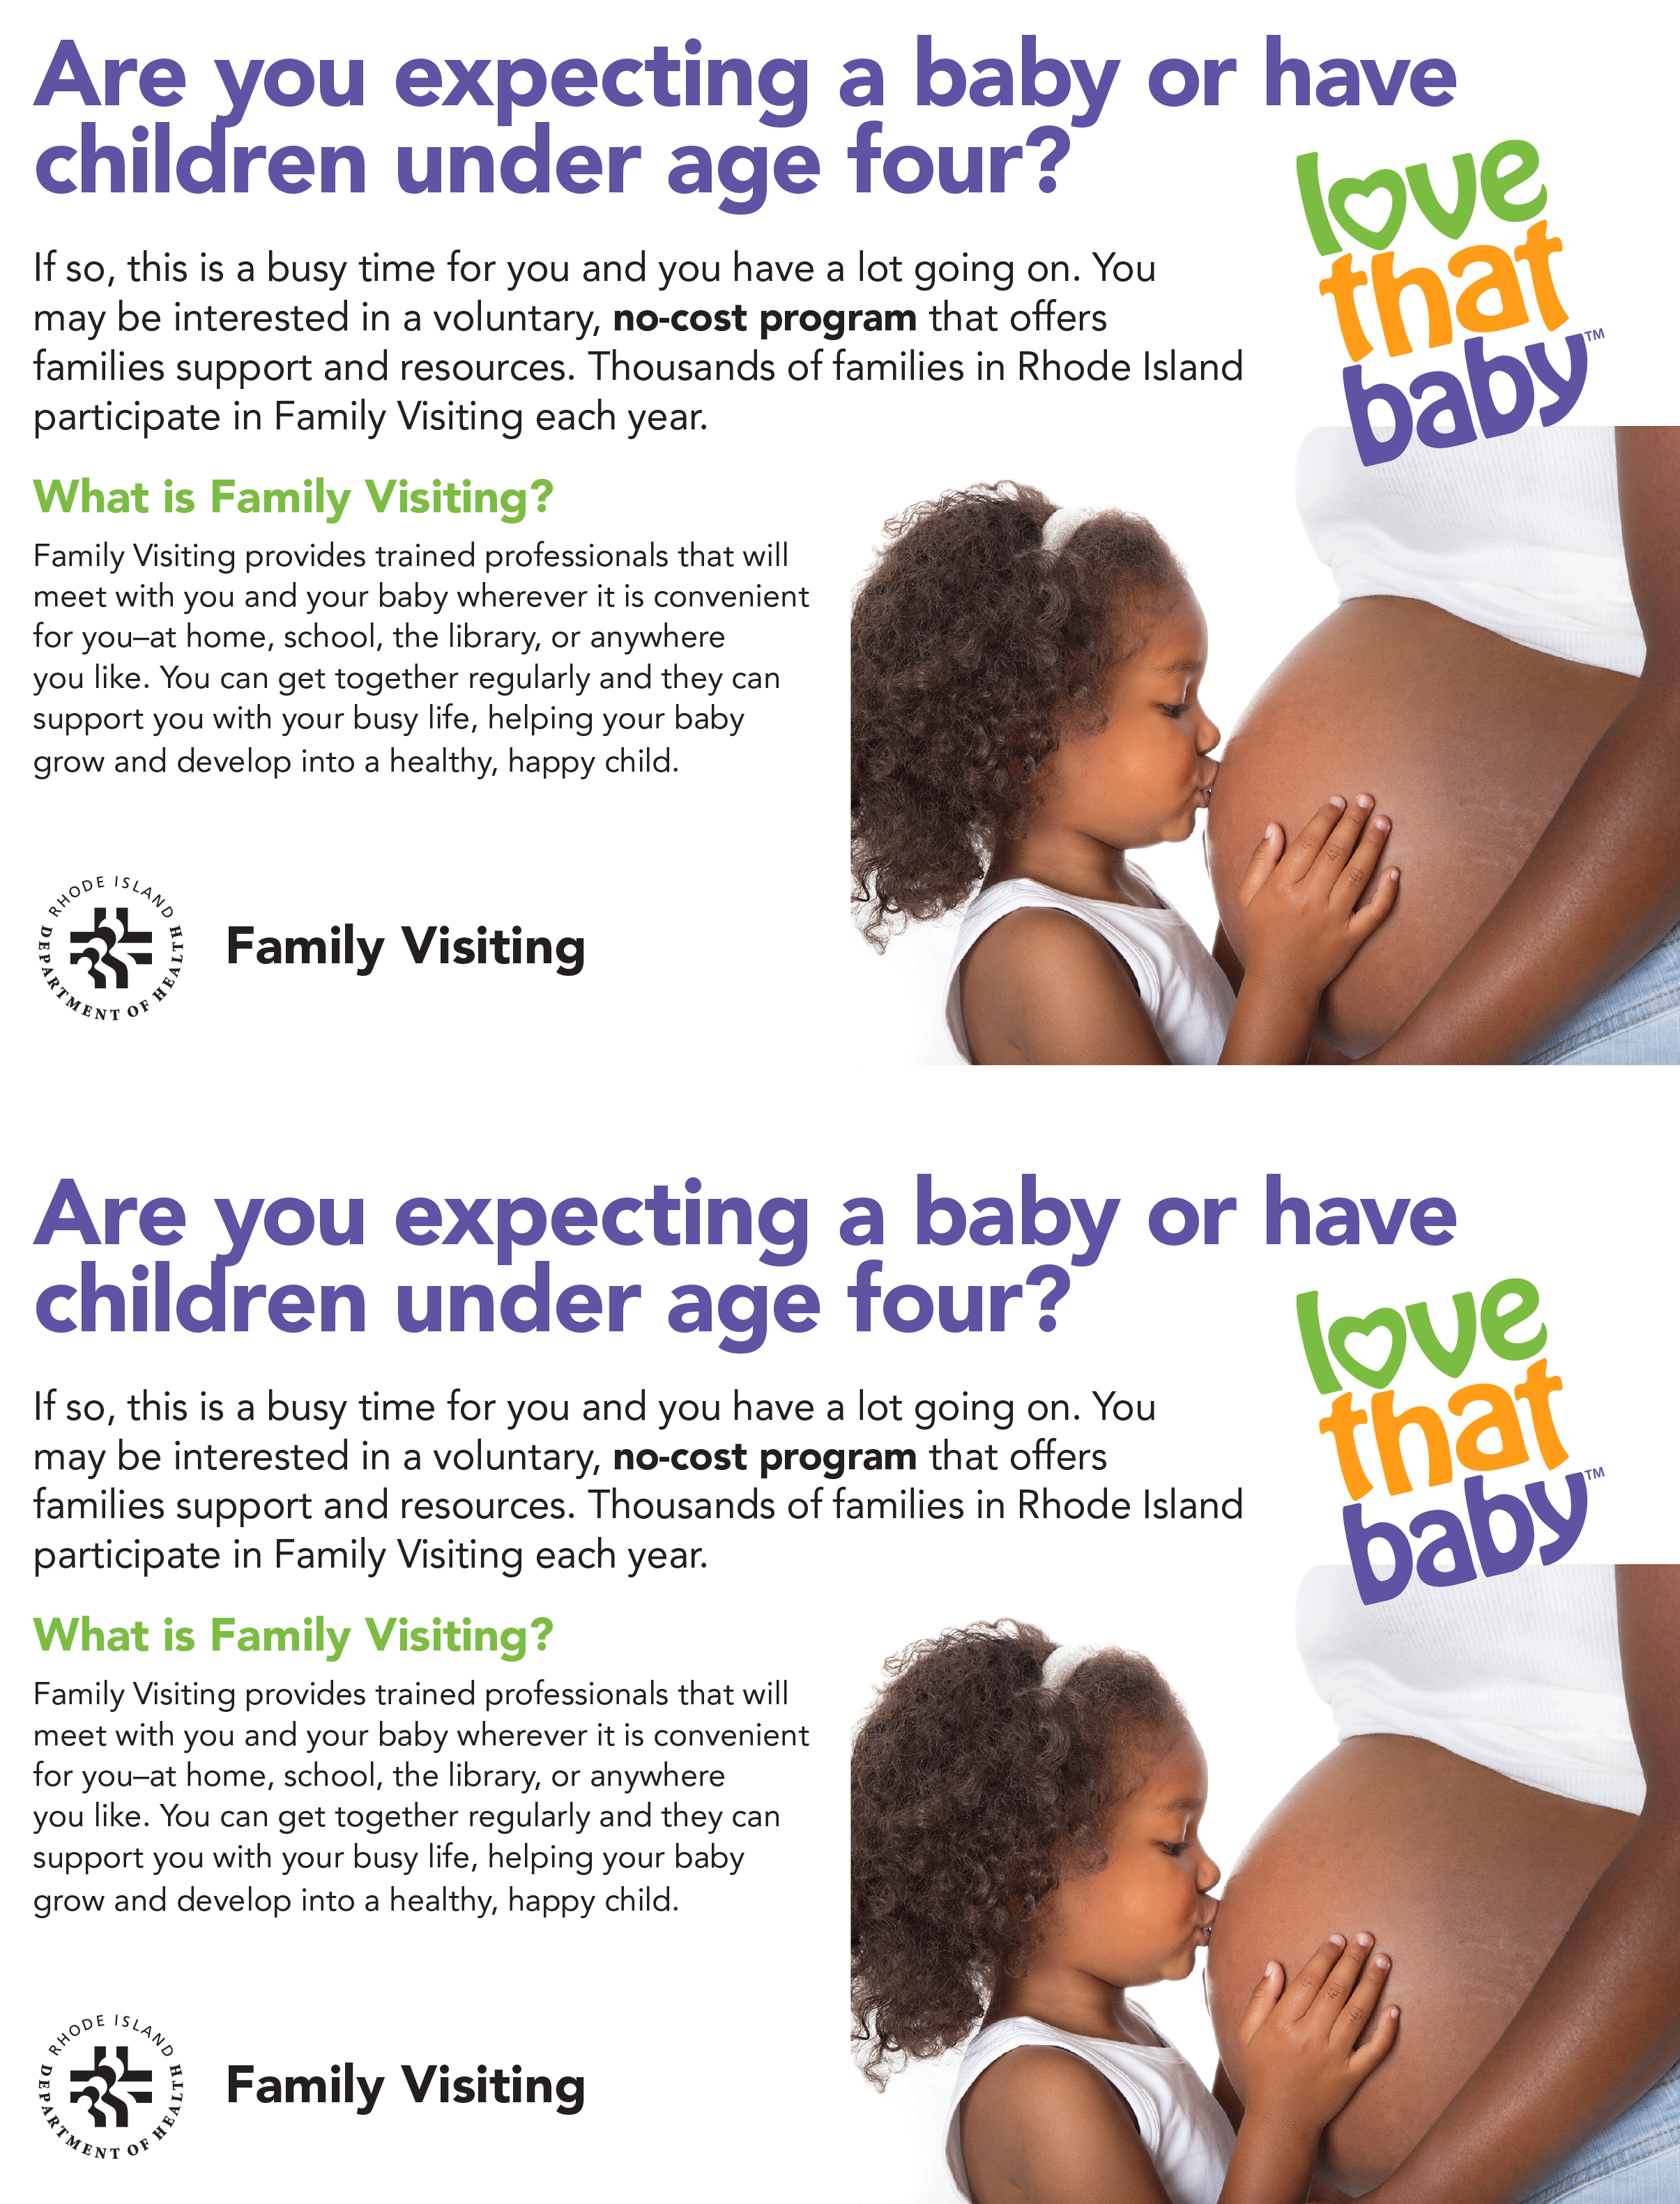 Are you expecting a baby or have children under age four?